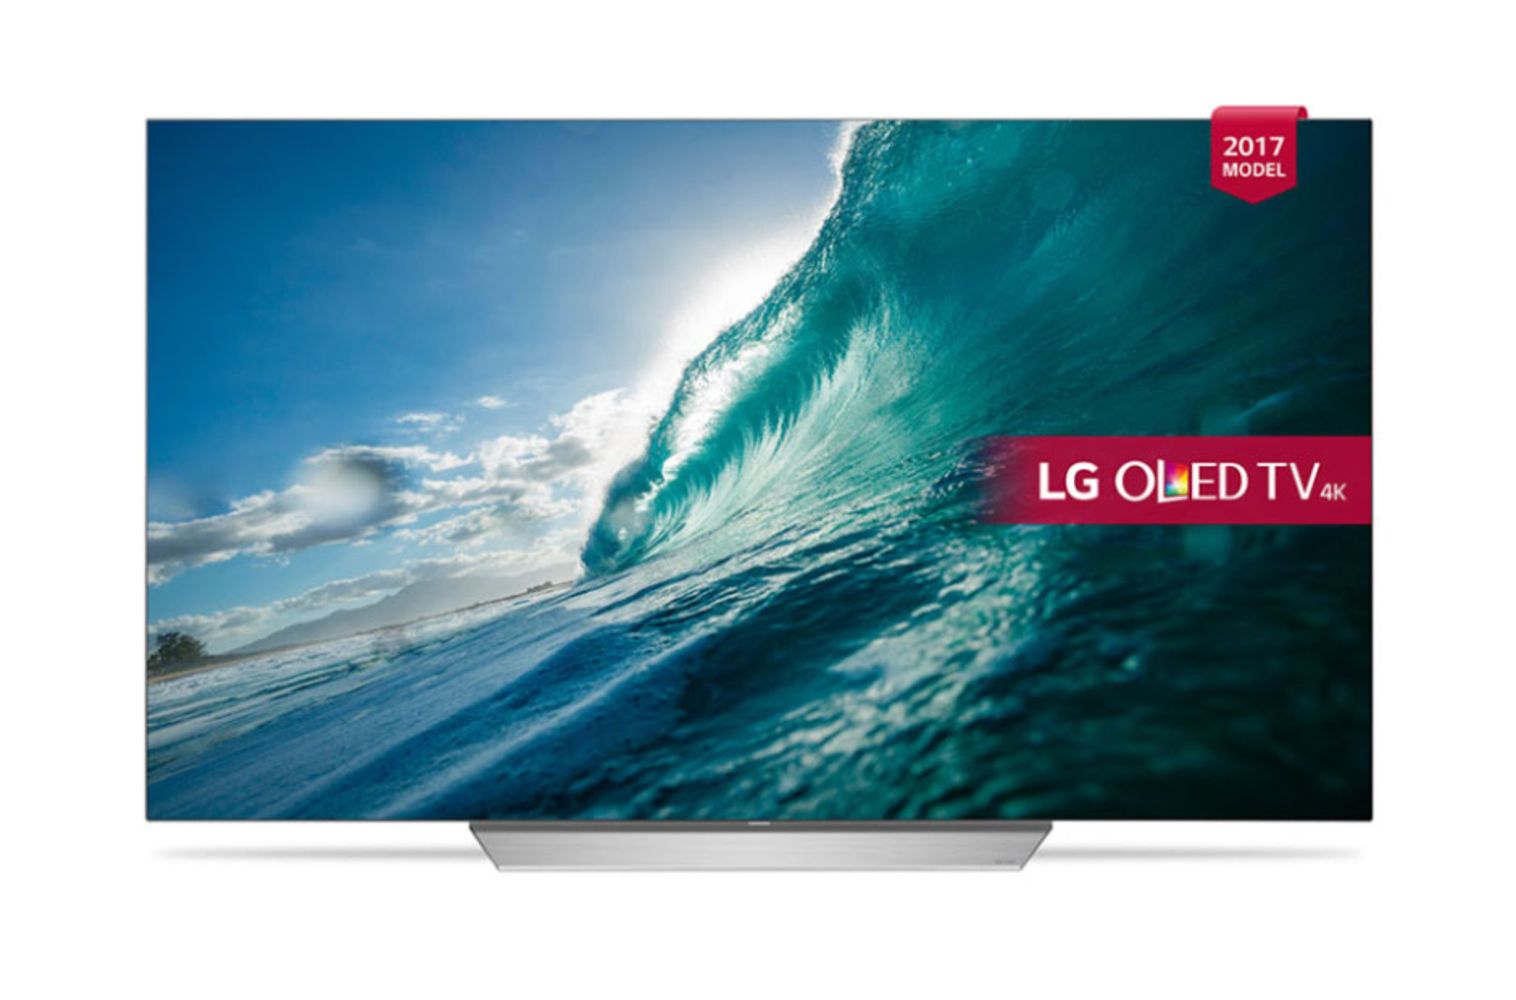 LG TVs & Monitors - Including 4K UHD Smart TVs In A Range Of Sizes, HD And Ultra-Wide Gaming Monitors